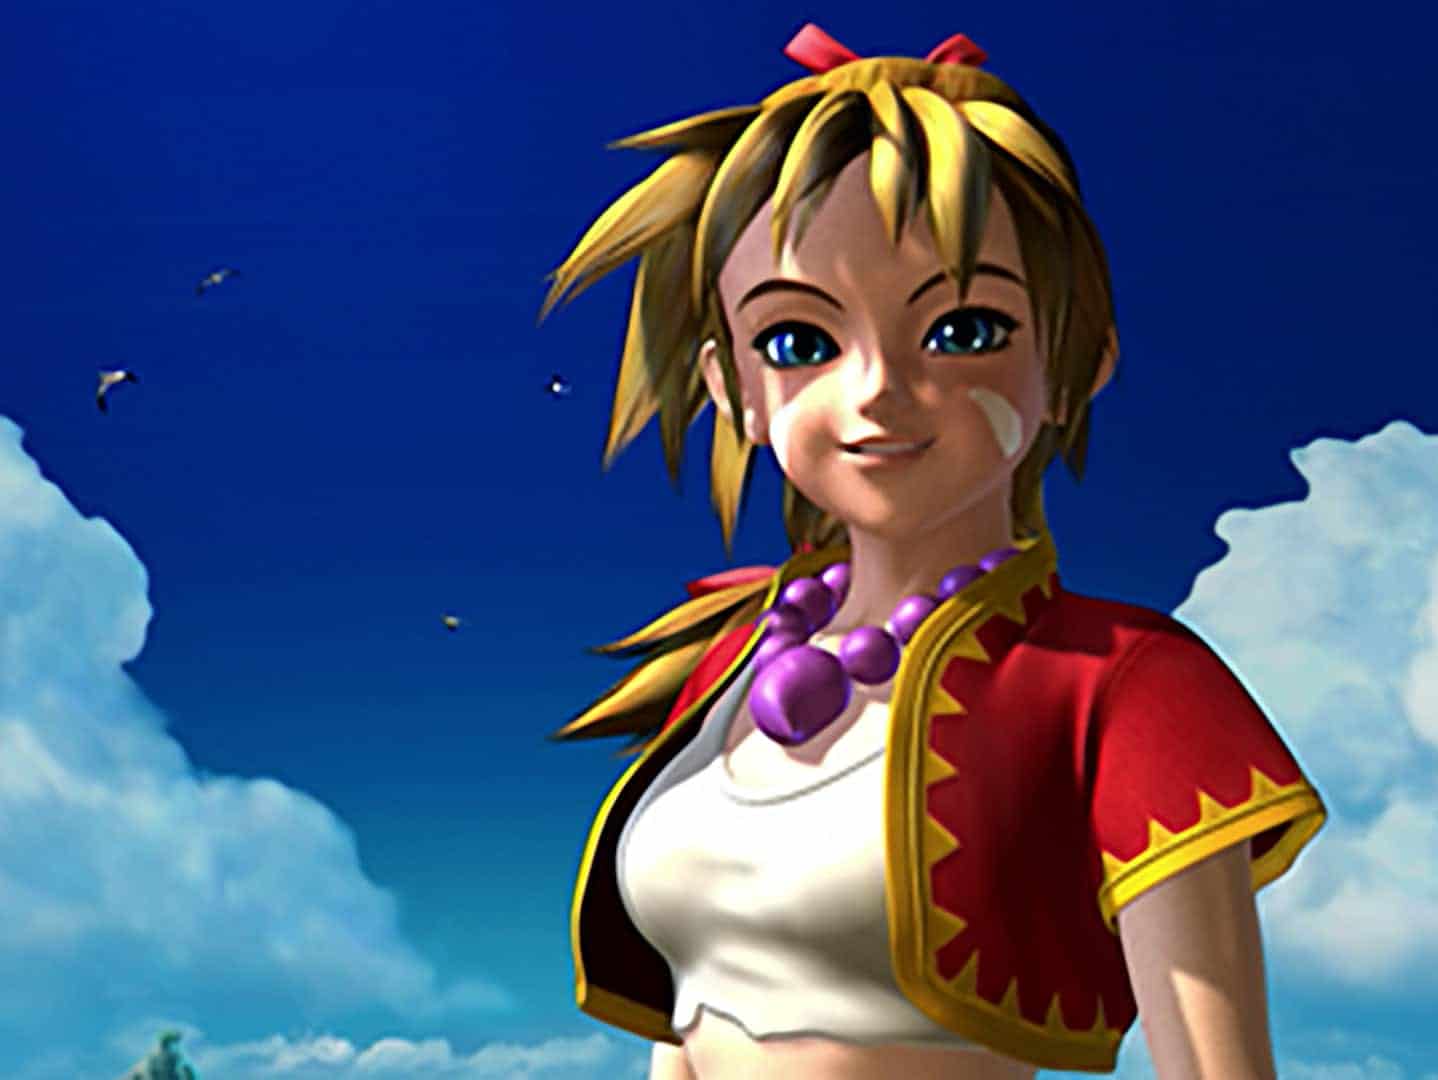 Chrono Cross: The Radical Dreamers Receives Physical Edition on Switch With English Text; However, You’ll Have to Import It